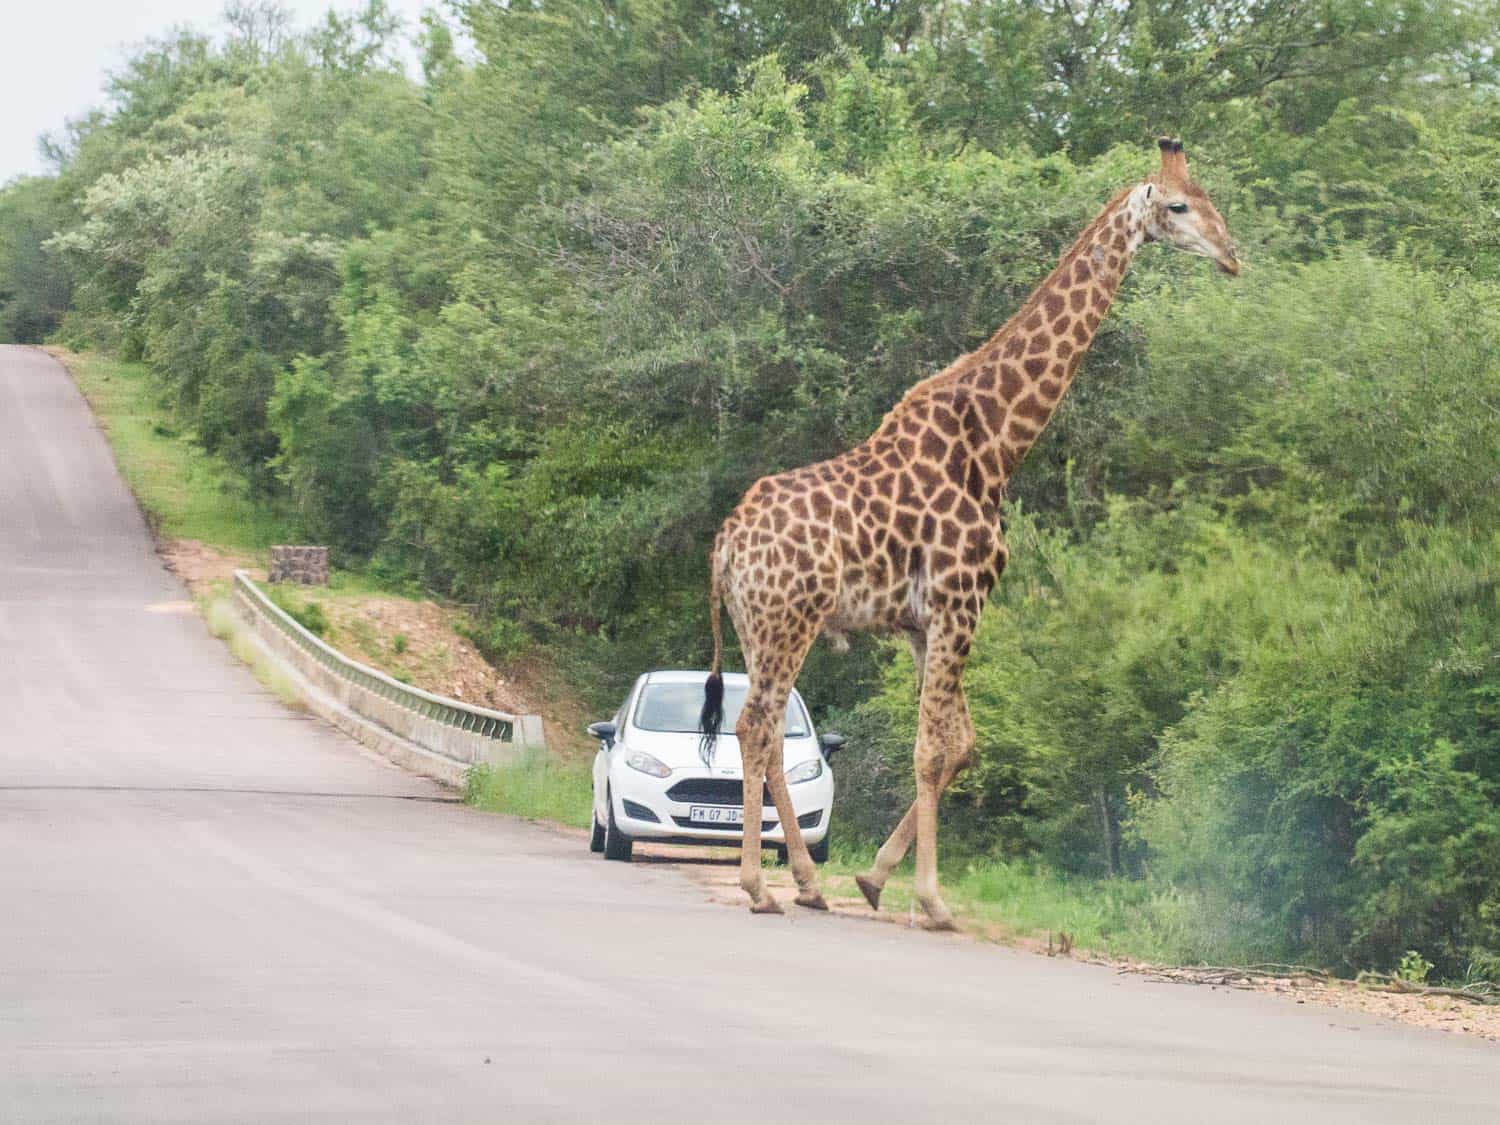 Kruger National Park self-drive costs - getting up close to a giraffe